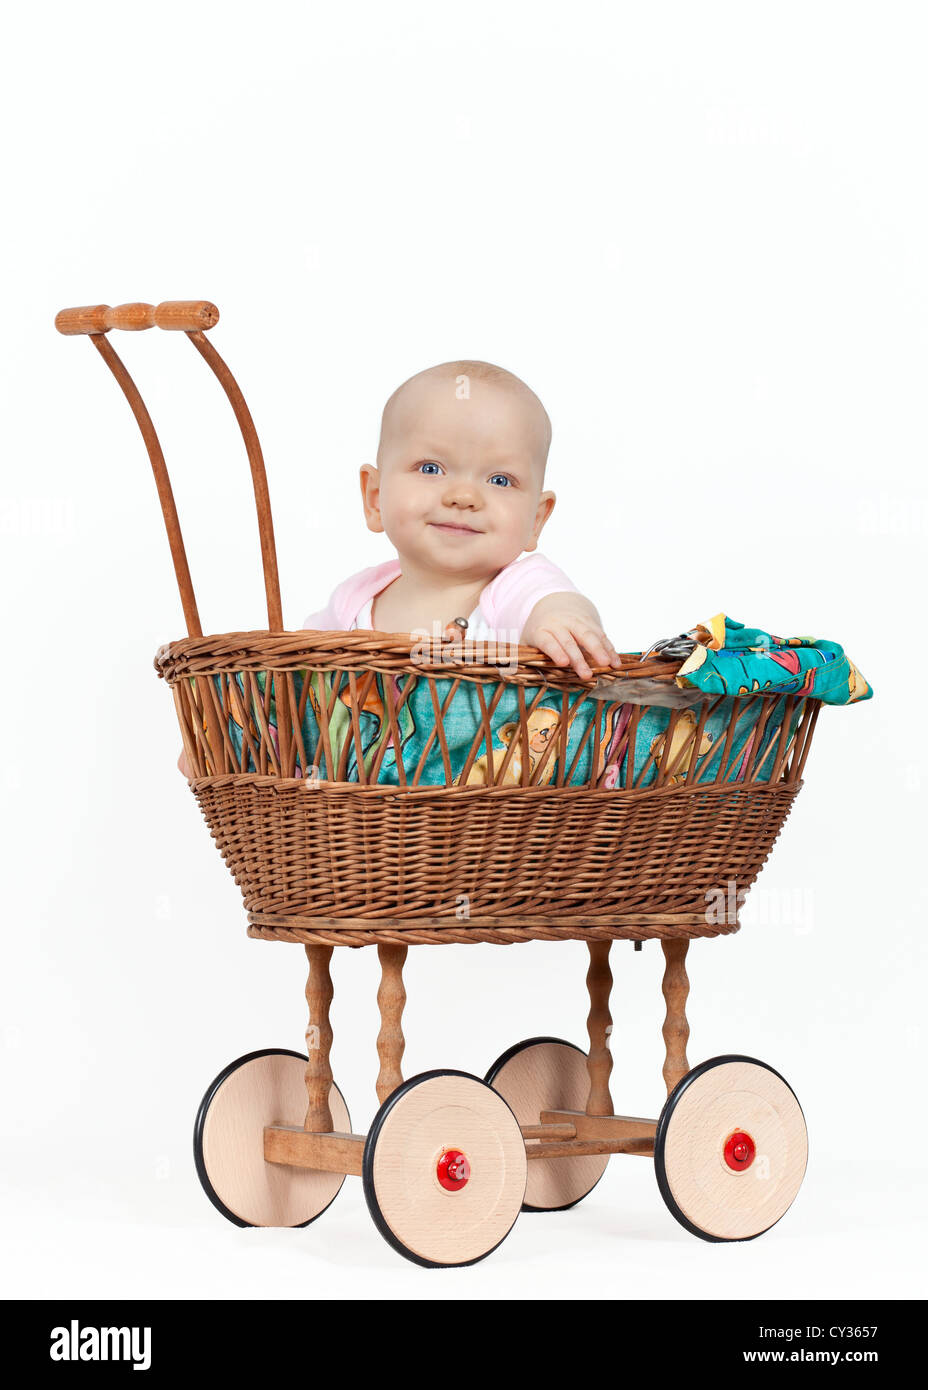 Young baby girl in a wicker pram Stock Photo